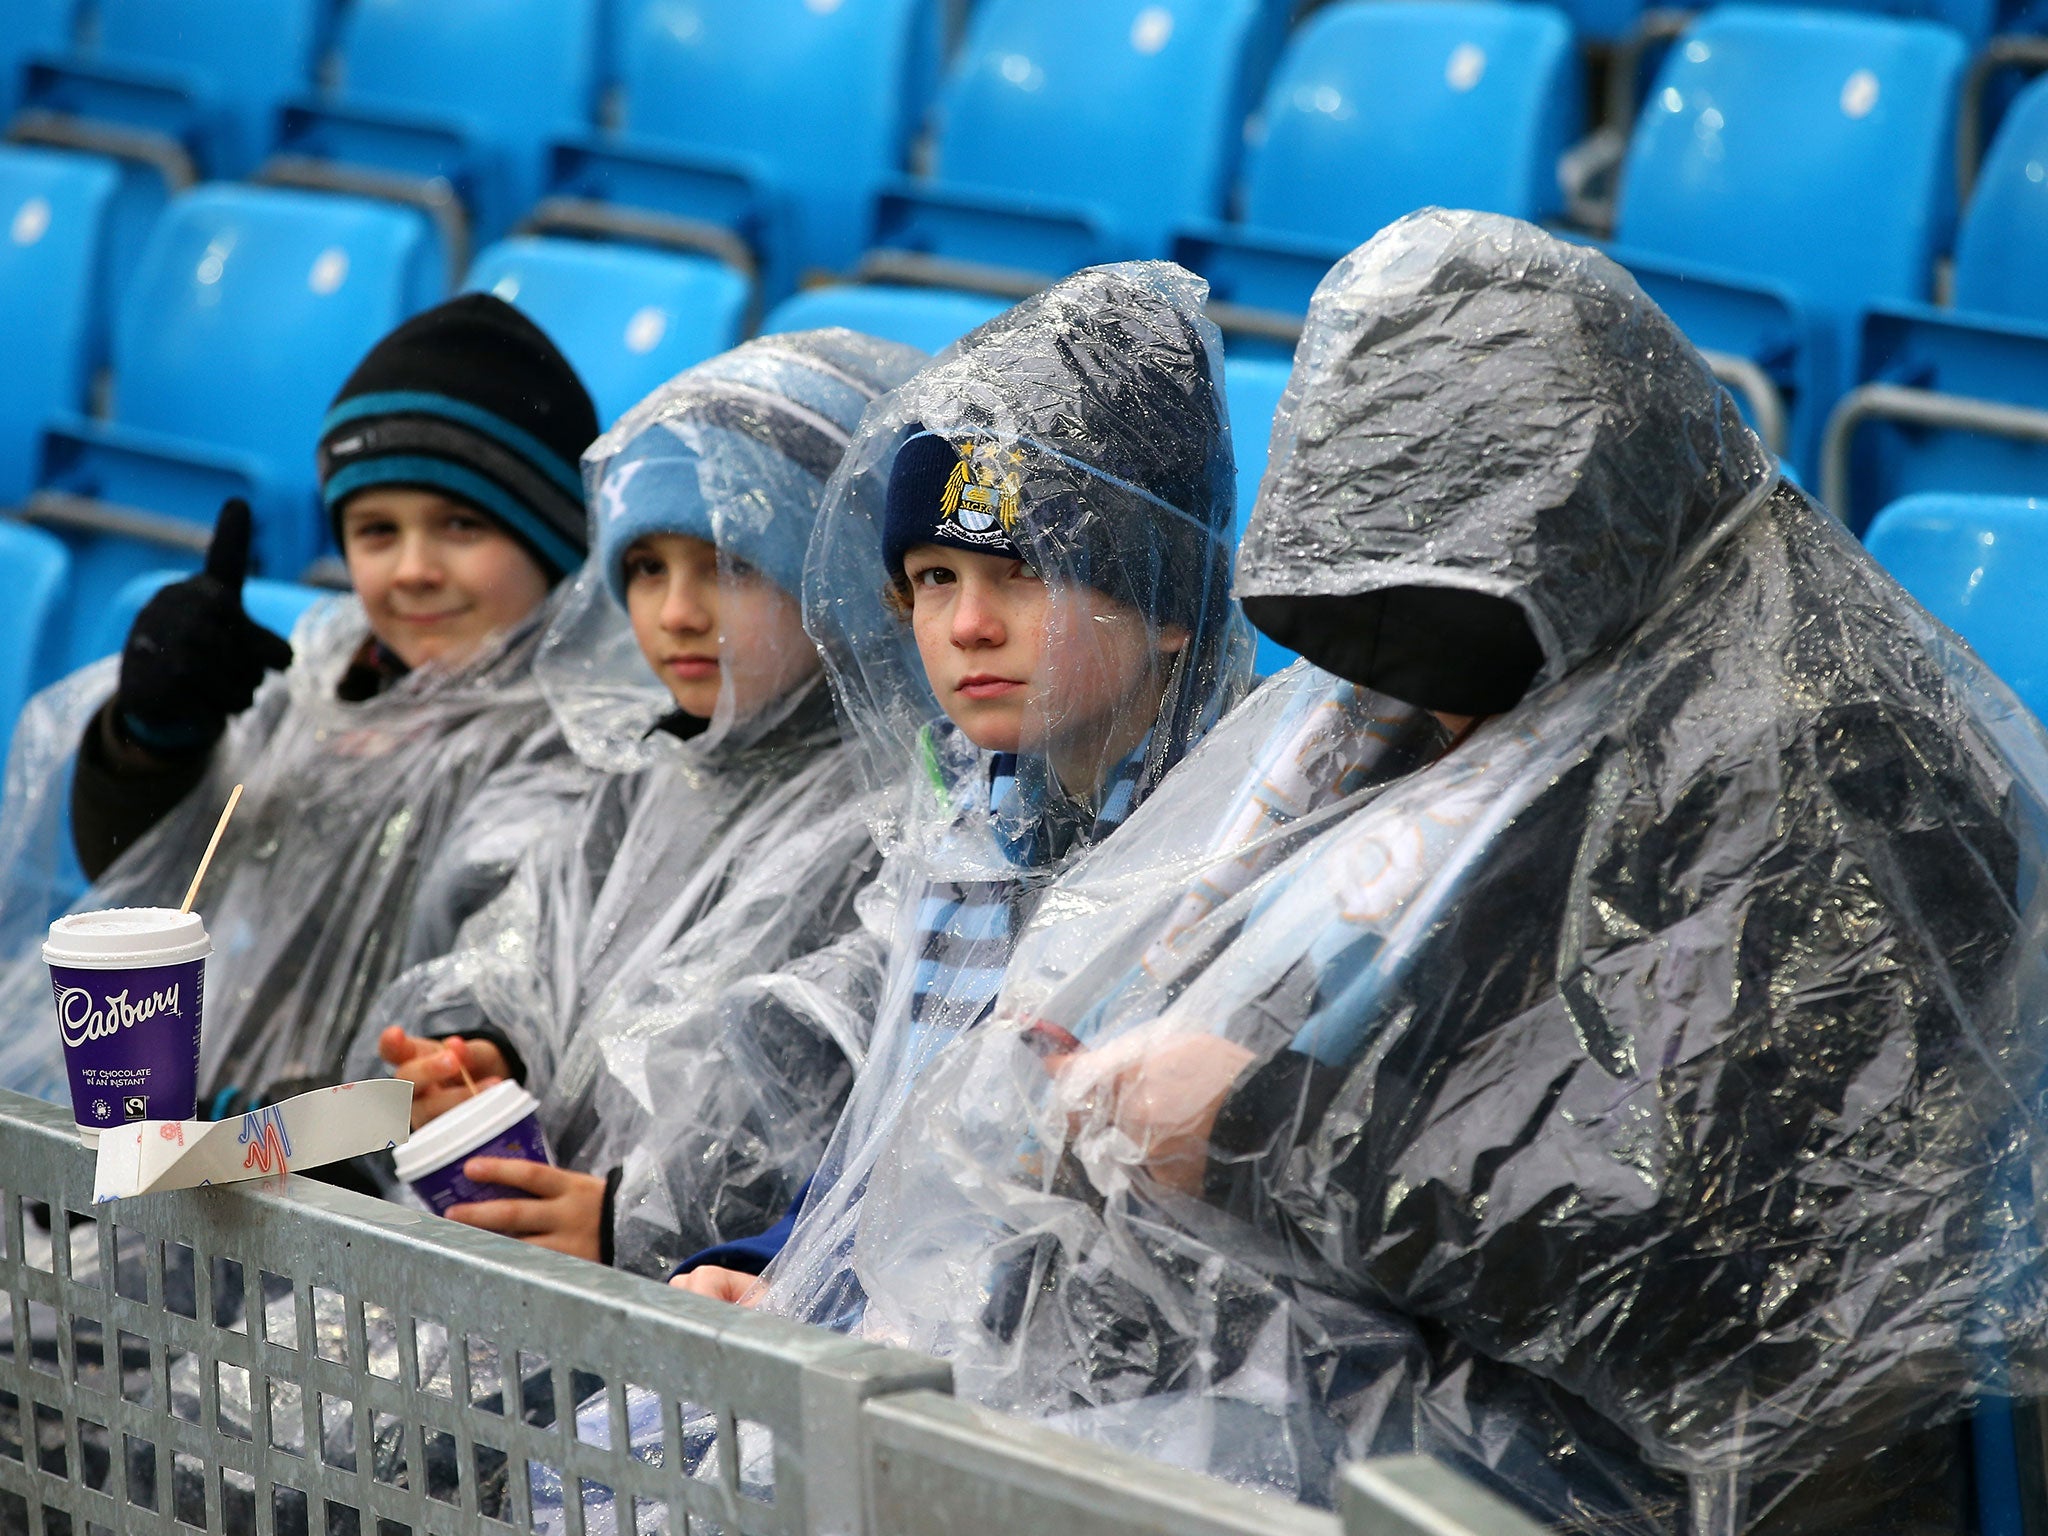 Manchester City fans sit in the stands at the Etihad Stadium ahead of the match against Leicester